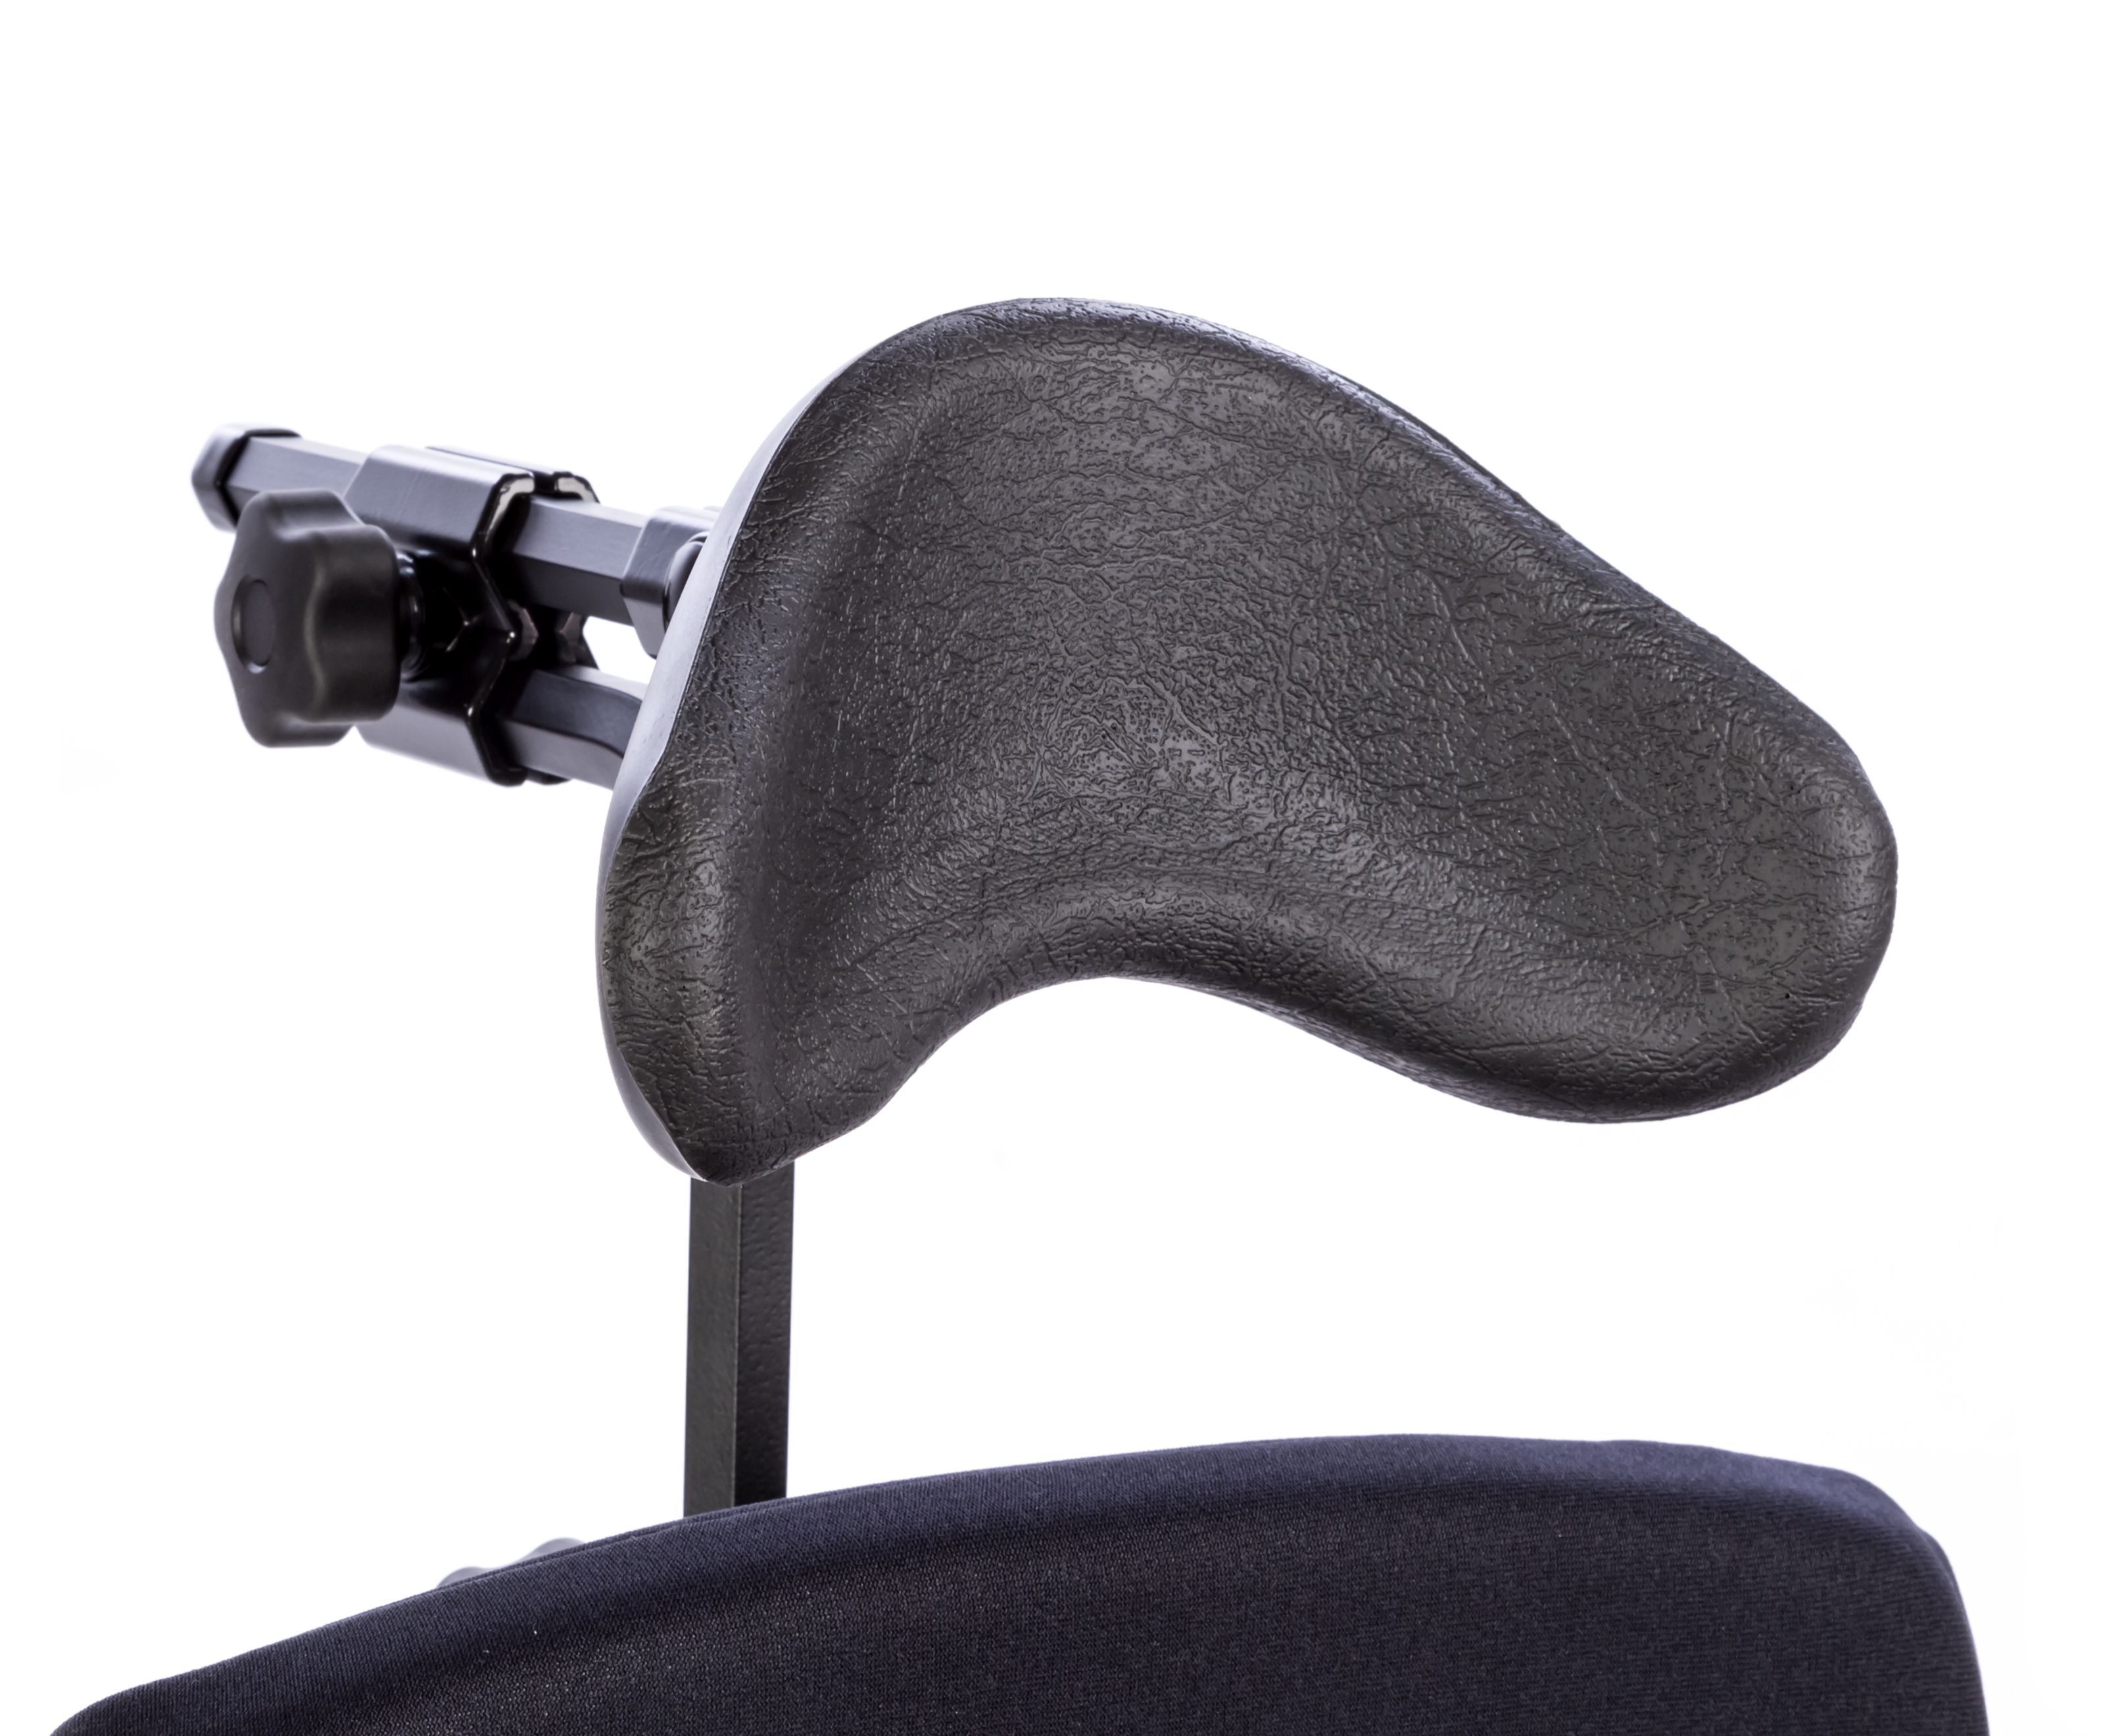 Head Support - 5"H x 8"W